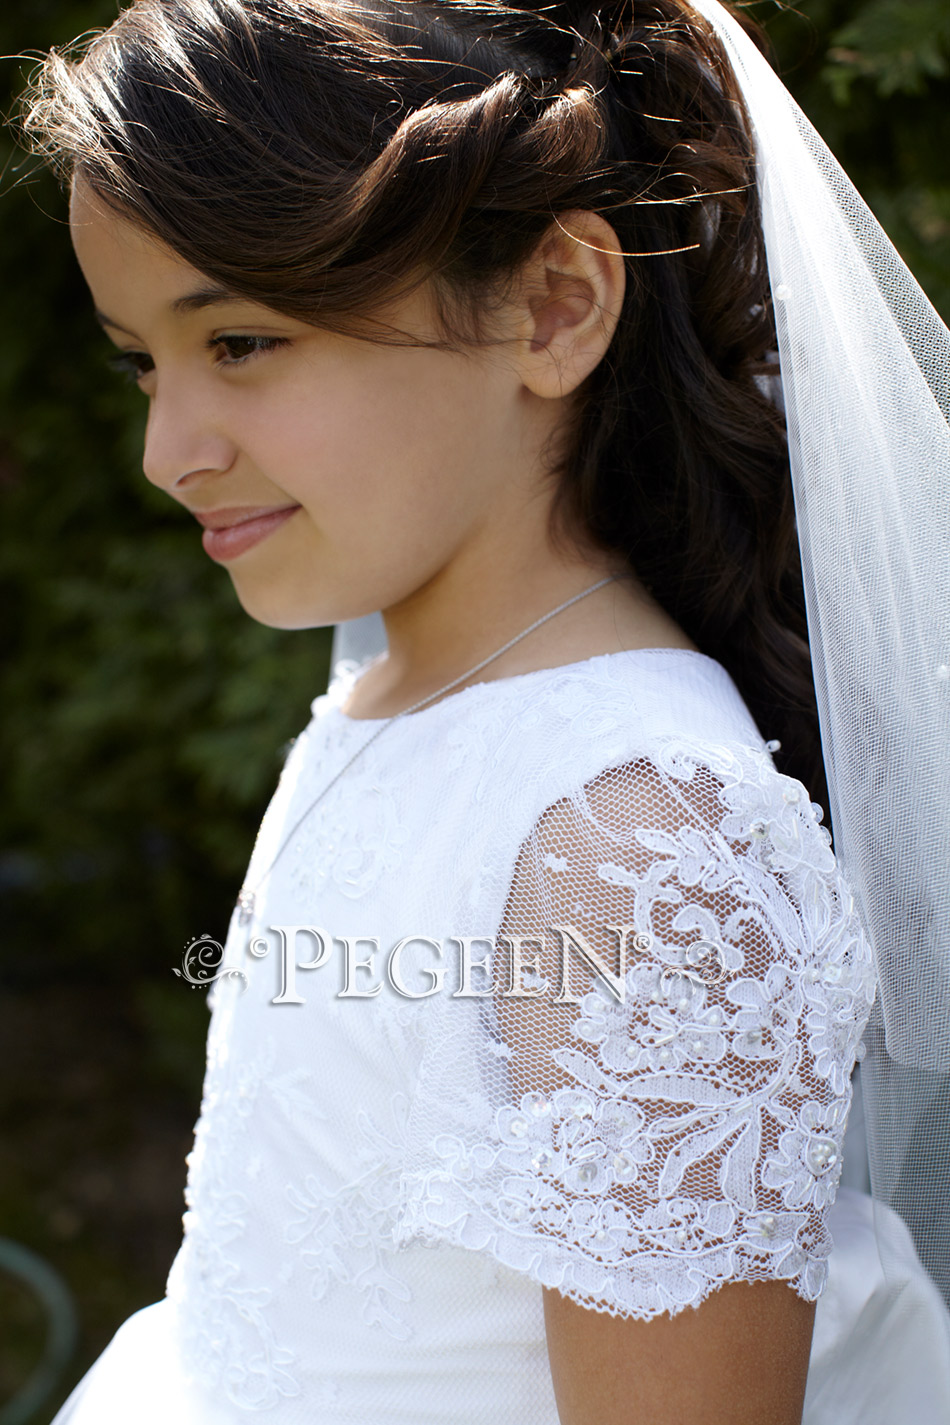 How to Choose the Perfect First Communion Dress